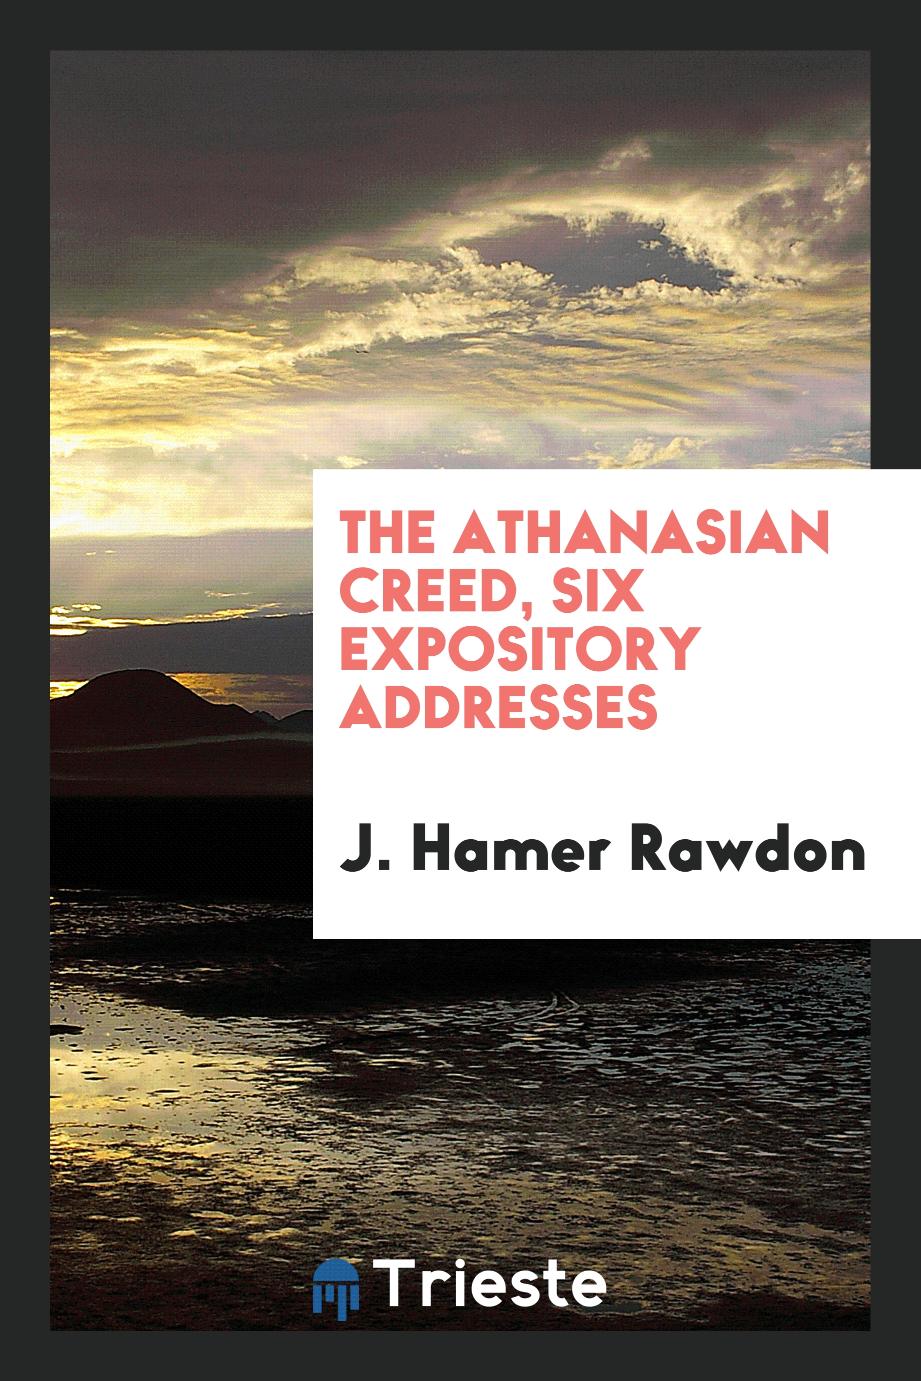 The Athanasian creed, six expository addresses